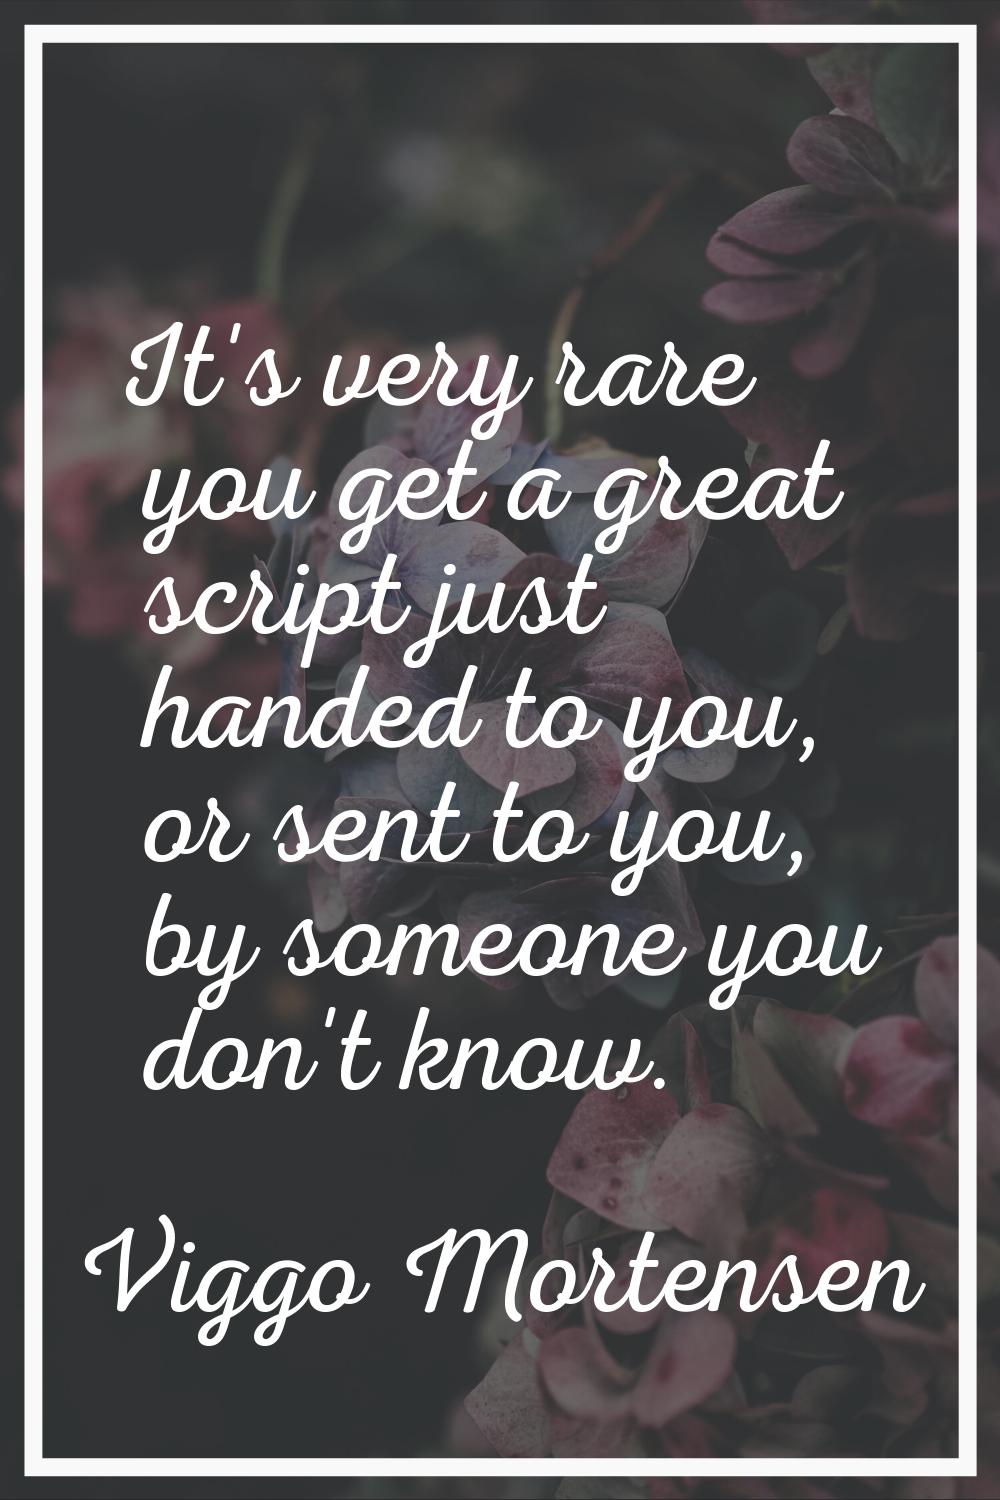 It's very rare you get a great script just handed to you, or sent to you, by someone you don't know